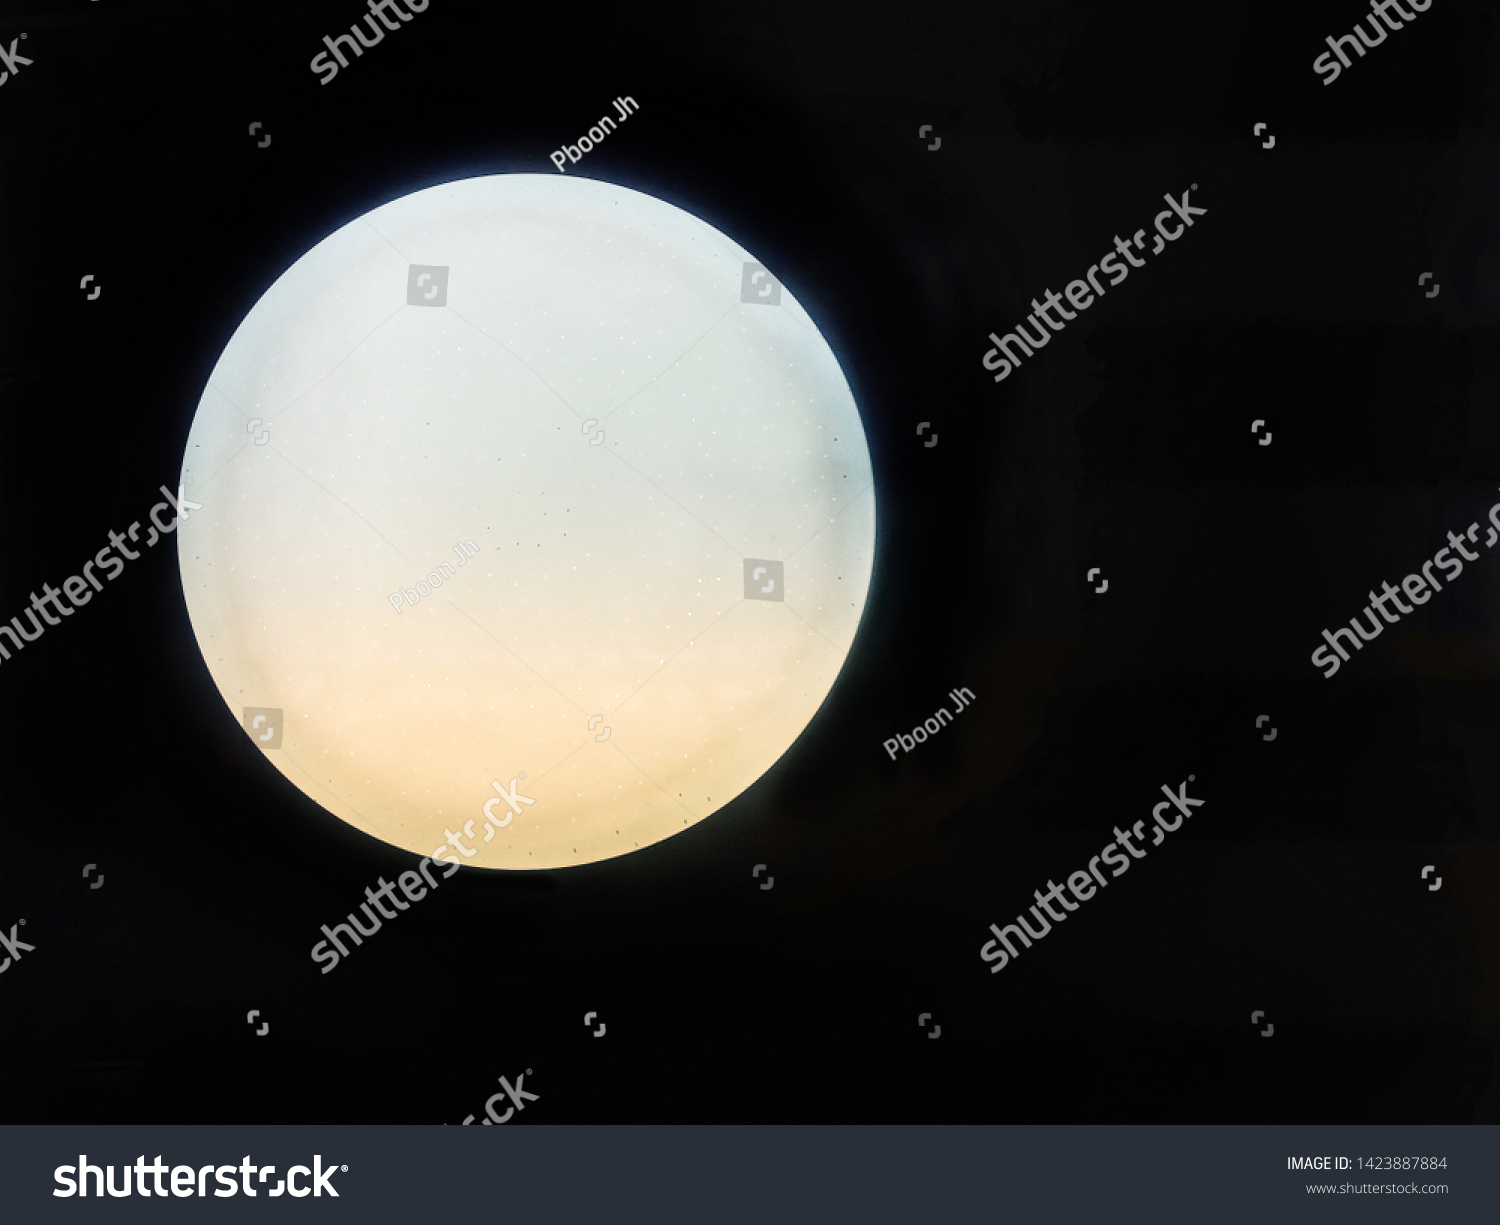 Blurred and defocused image of Glass globe shaped ball ceiling lamps on ceiling background. 
Modern lamps, color change LED bulbs. Moon illustration concept. #1423887884